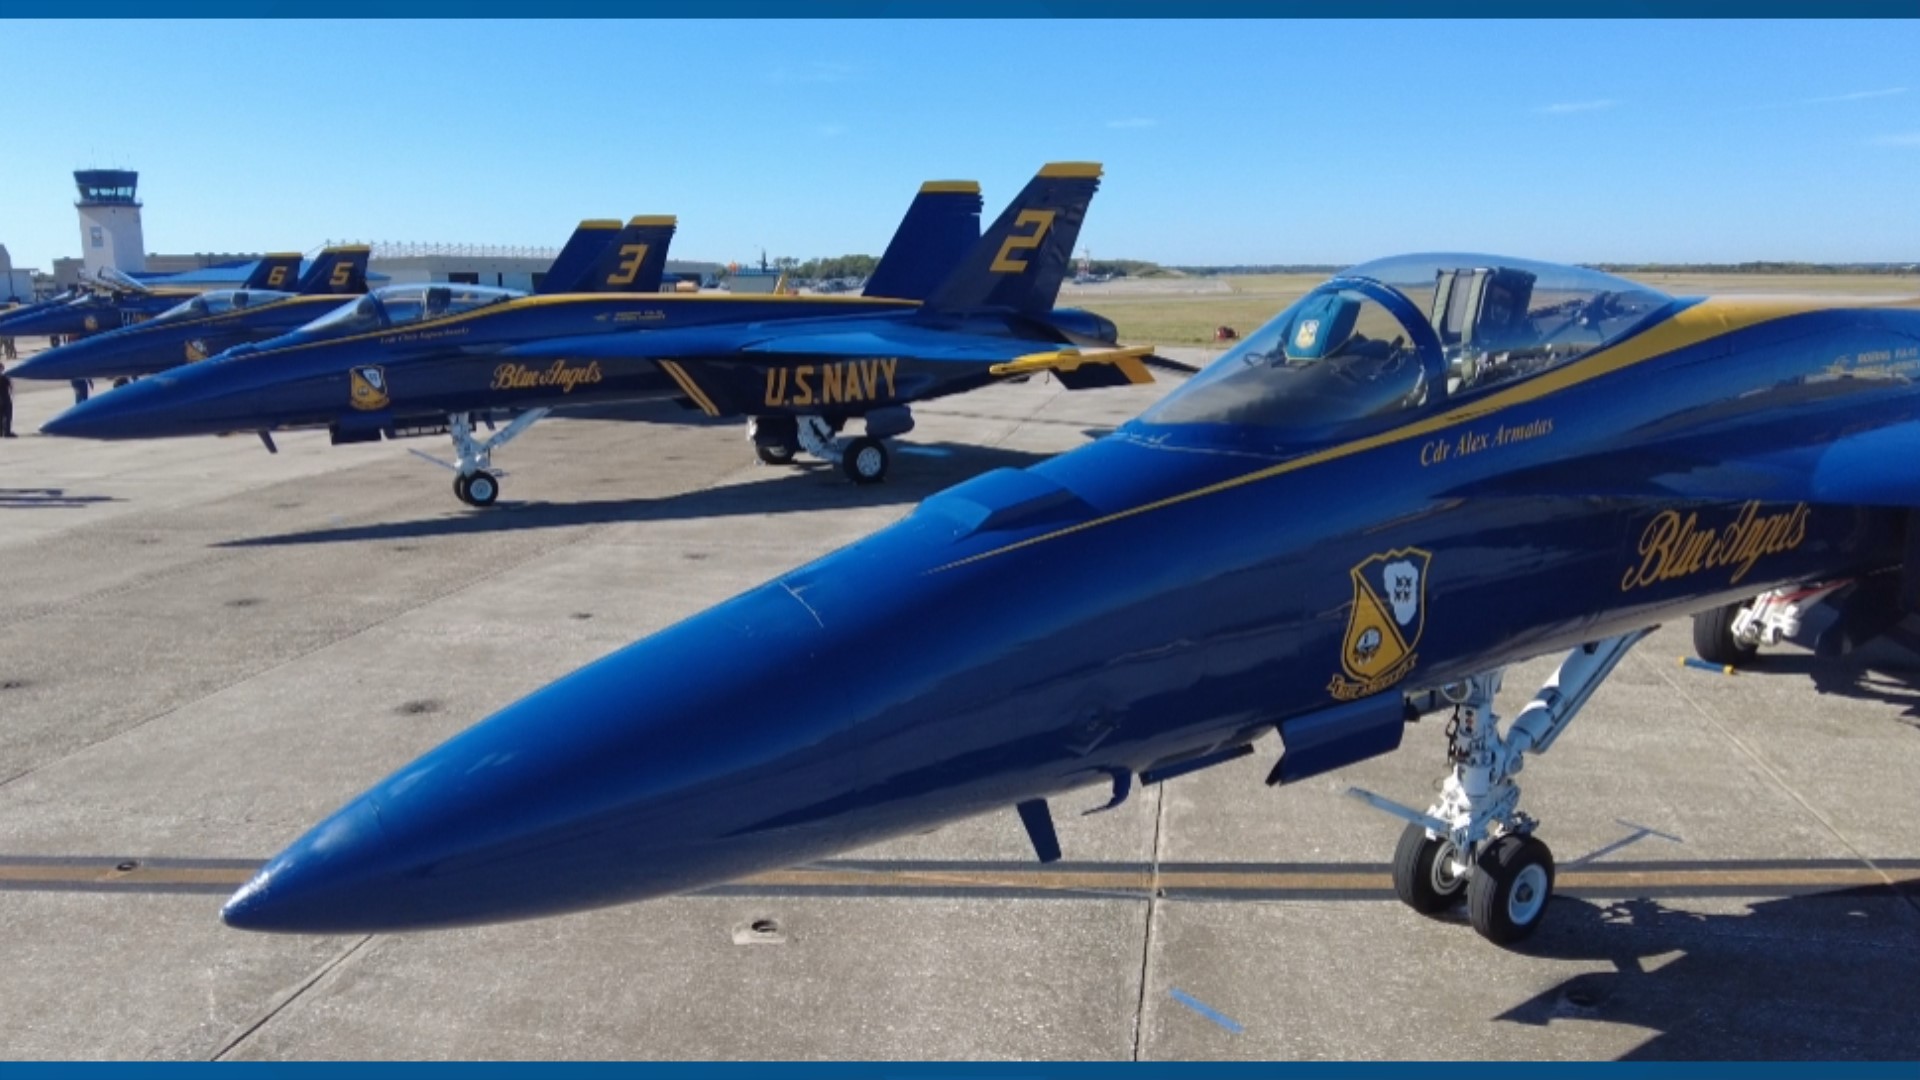 The show will feature the renowned US Navy Blue Angels and an impressive array of aircraft on display in the sky and the ground!